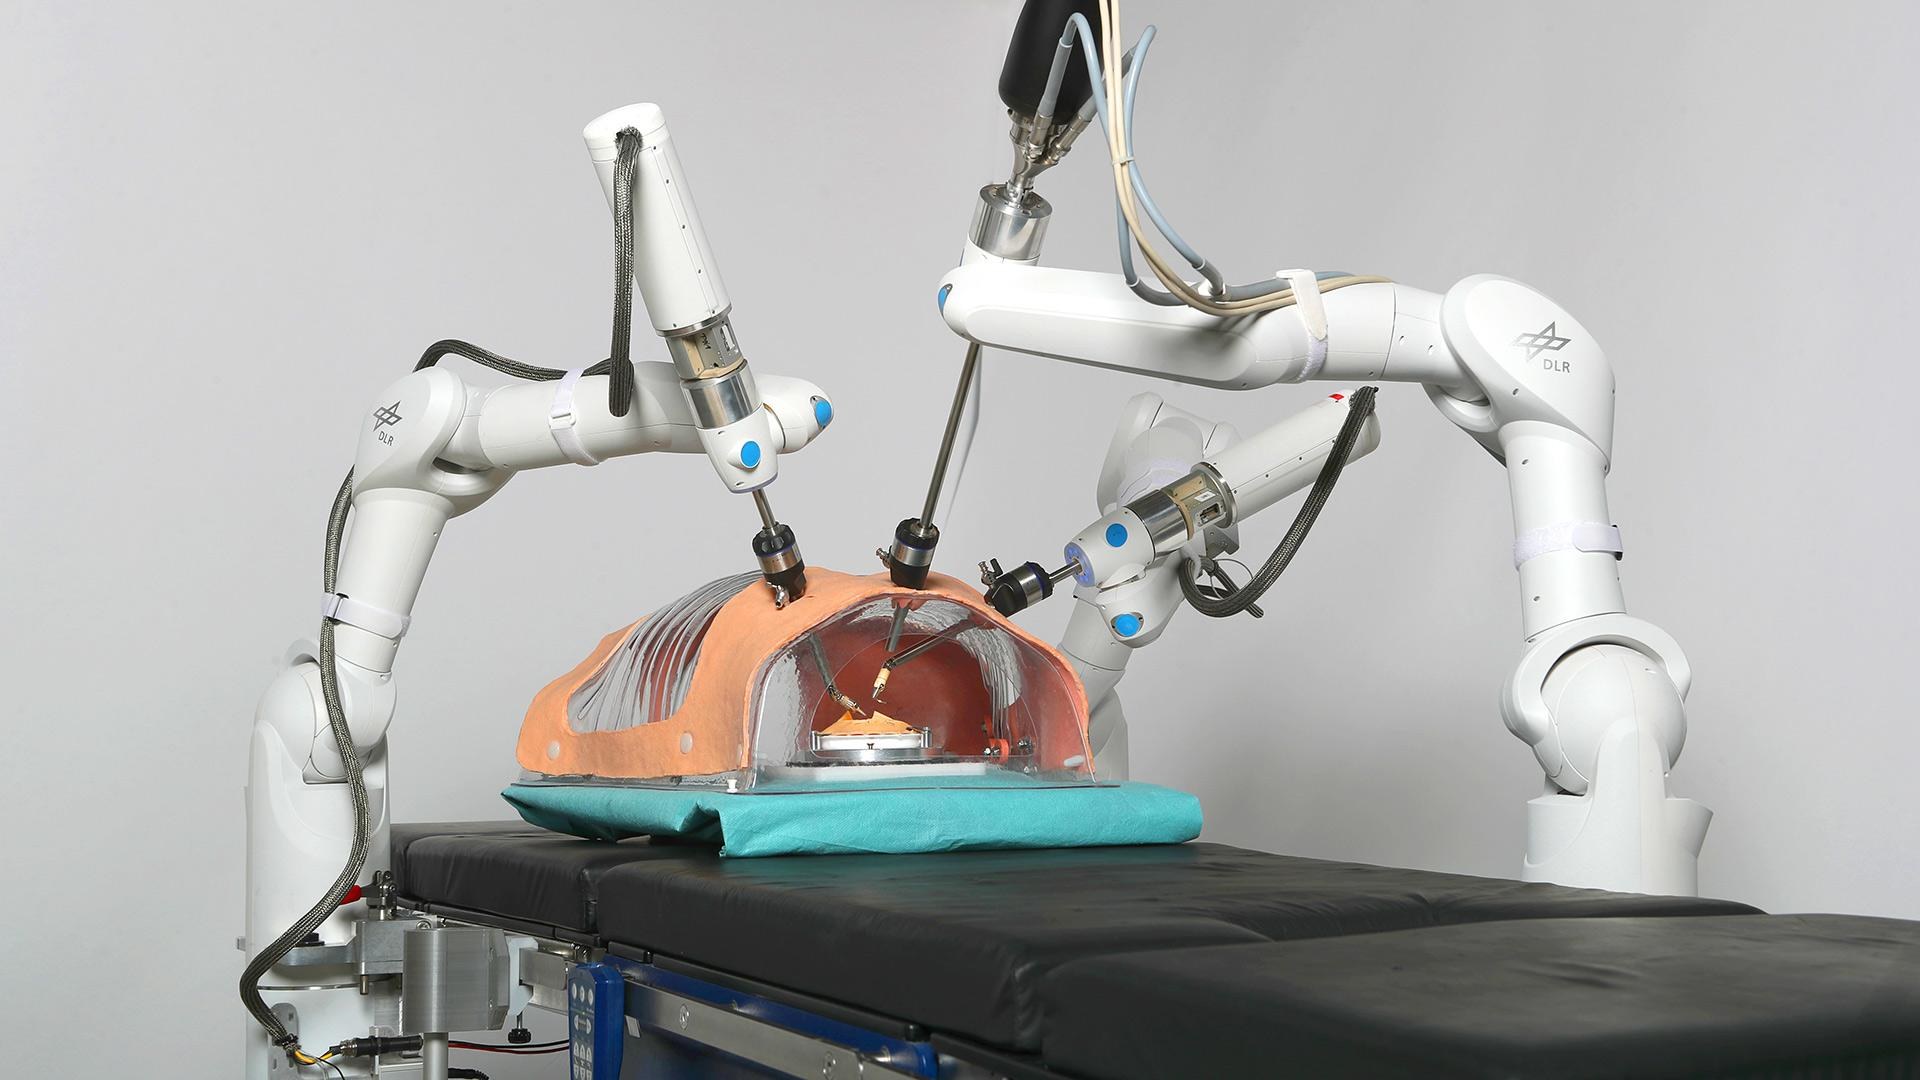 The ‘Miro Innovation Lab’ focuses on robot-assisted surgery